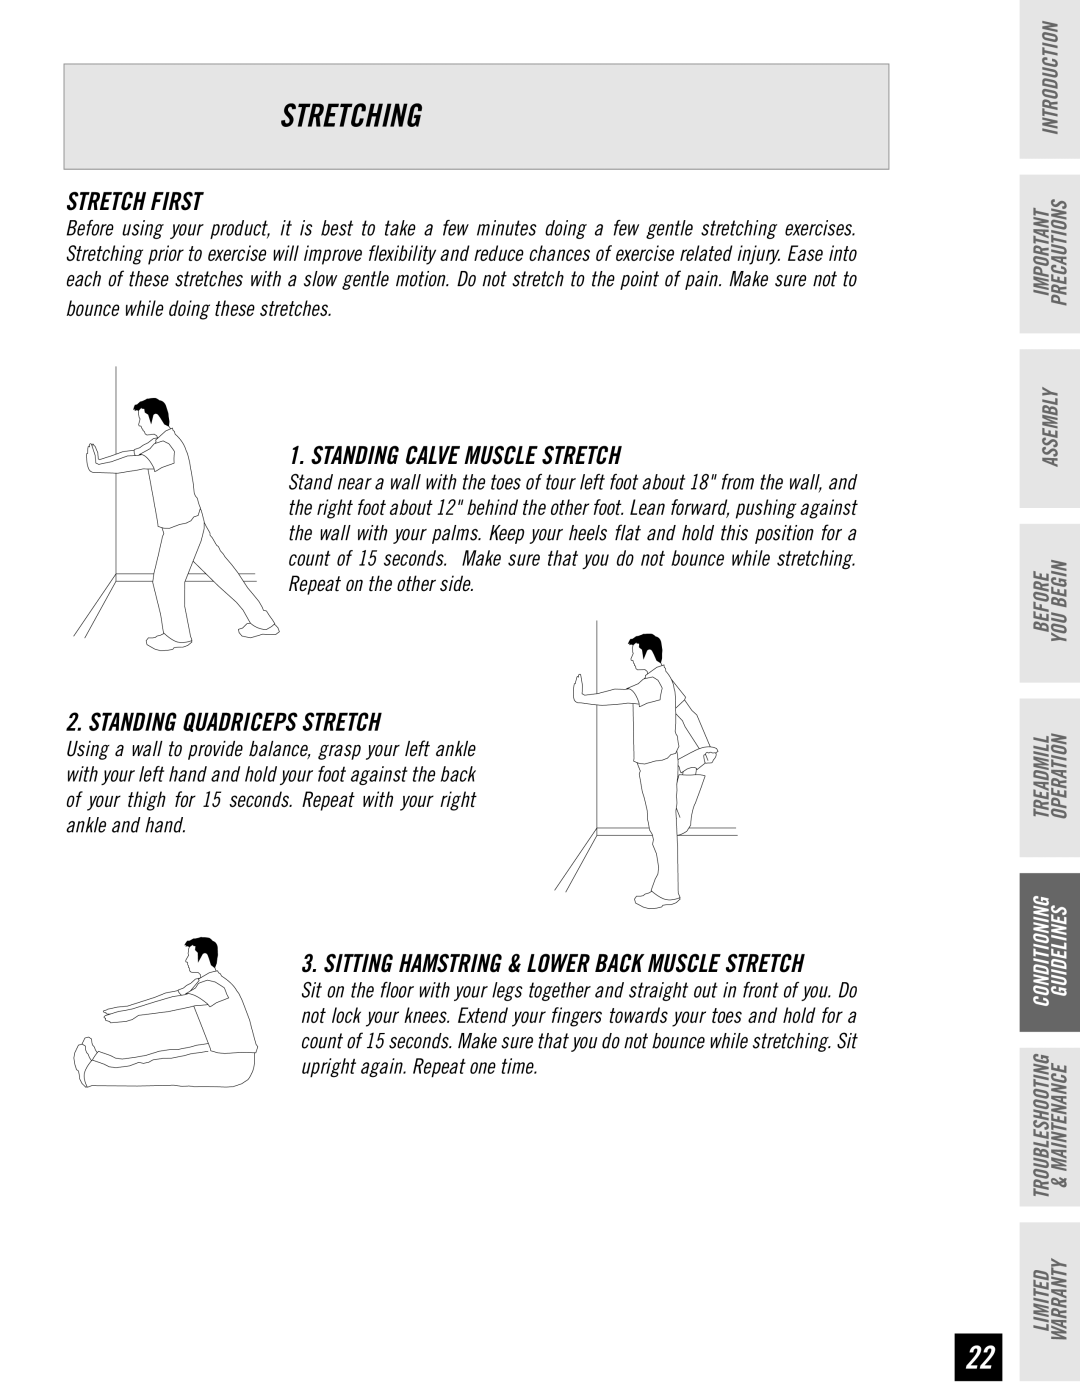 Horizon Fitness T63, T62 Stretching, Stretch First, Standing Calve Muscle Stretch, Standing Quadriceps Stretch, Assembly 